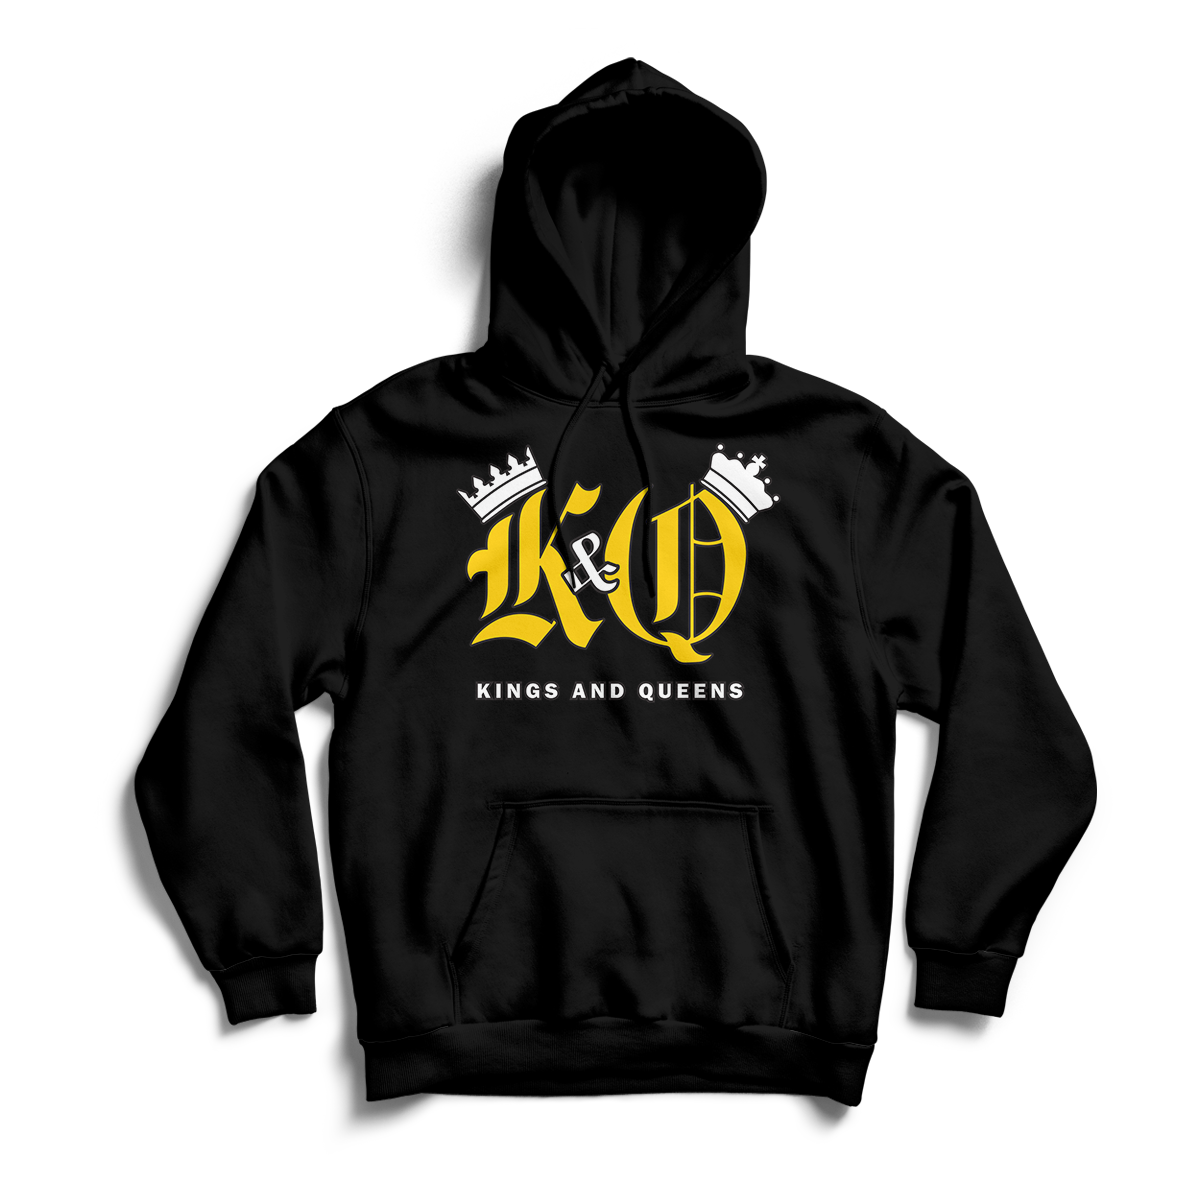 'Kings And Queens' Unisex Pullover Hoodie